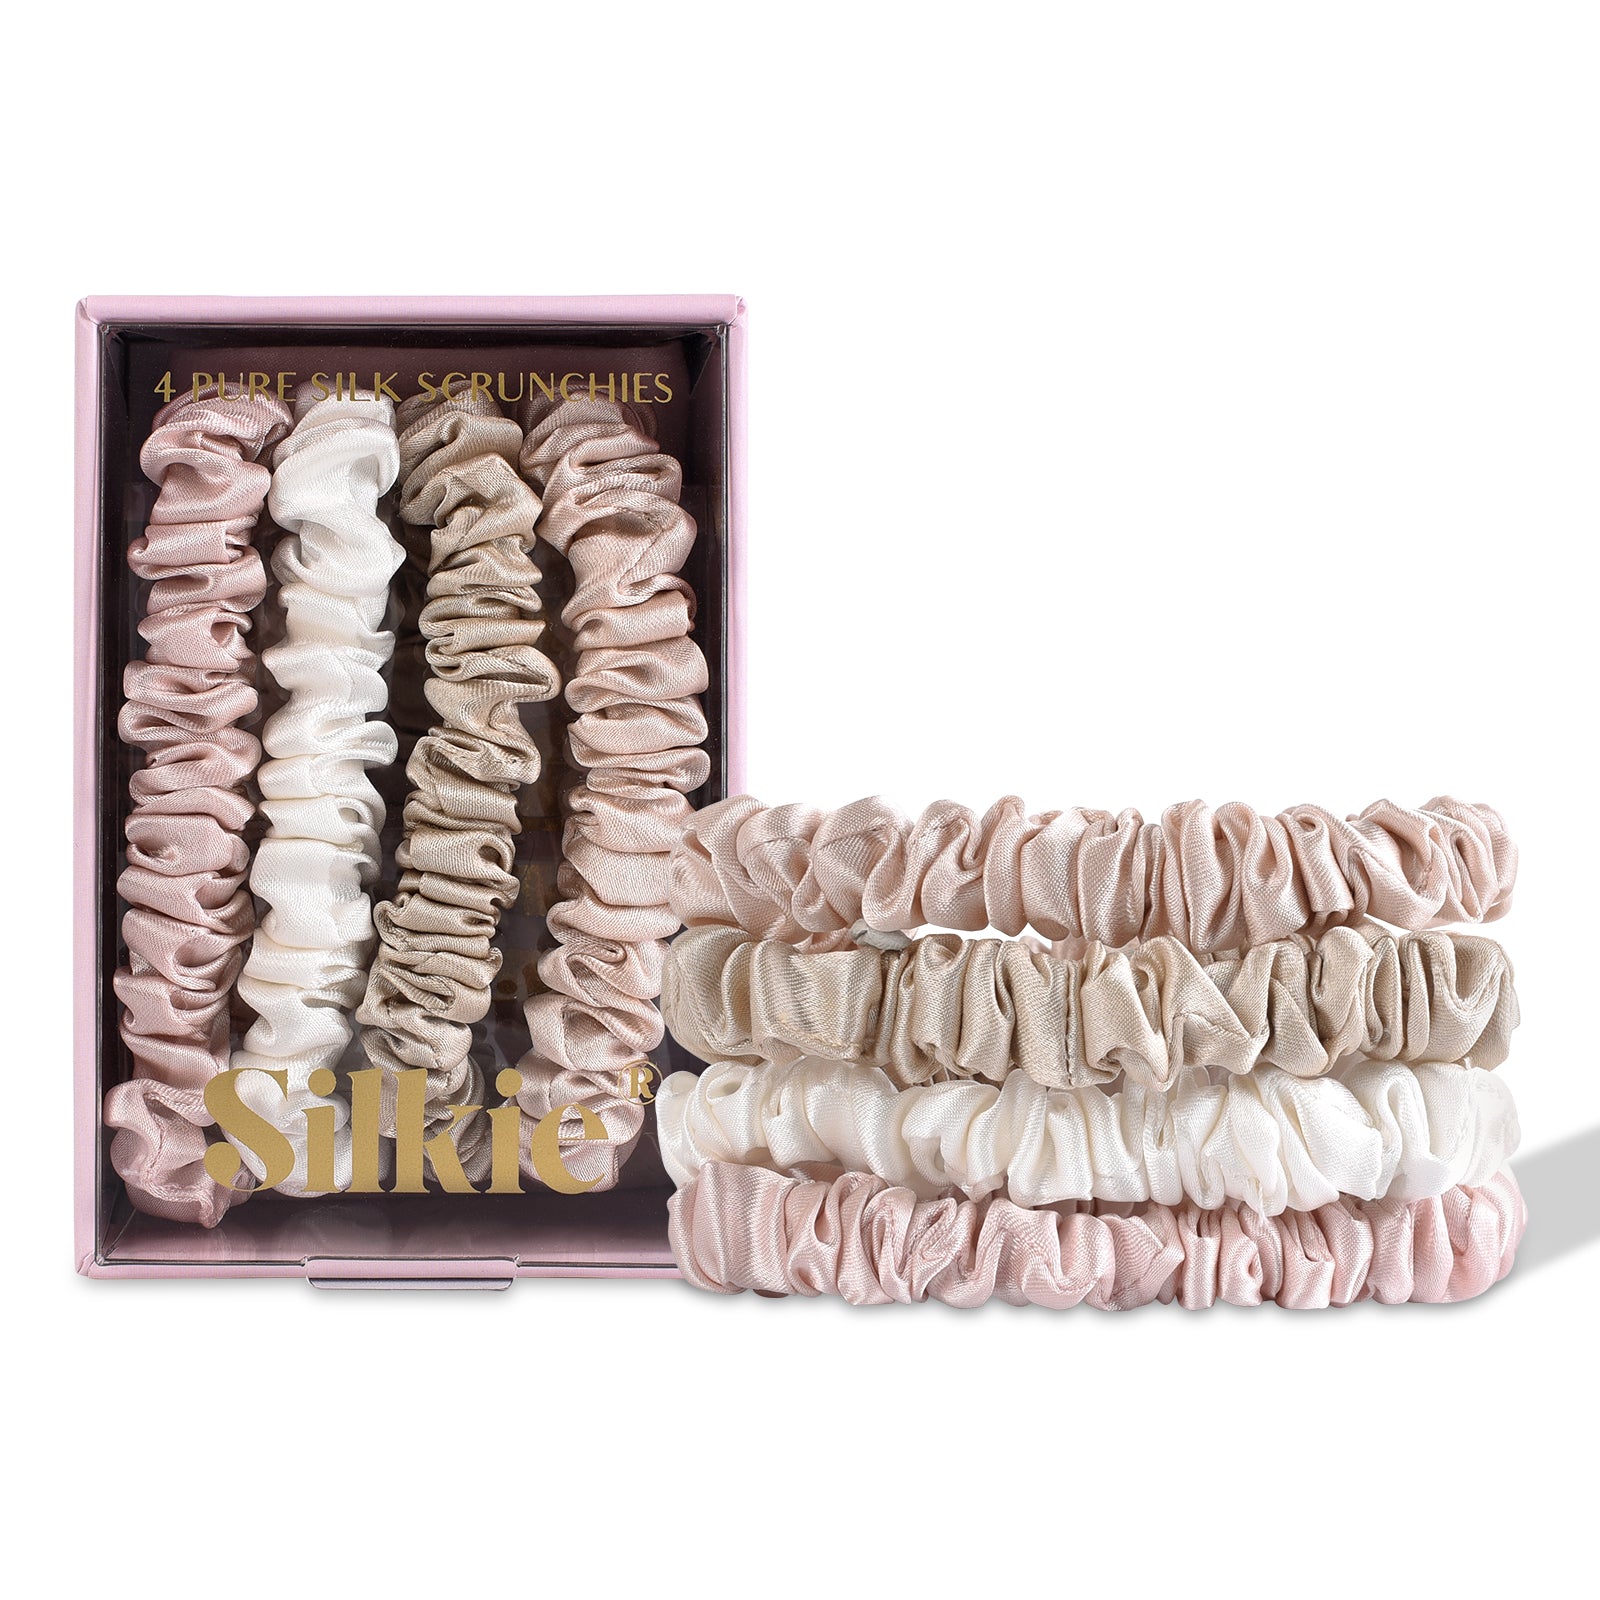 Silkie 100% Pure Mulberry Silk Skinny Scrunchies - Various Colors